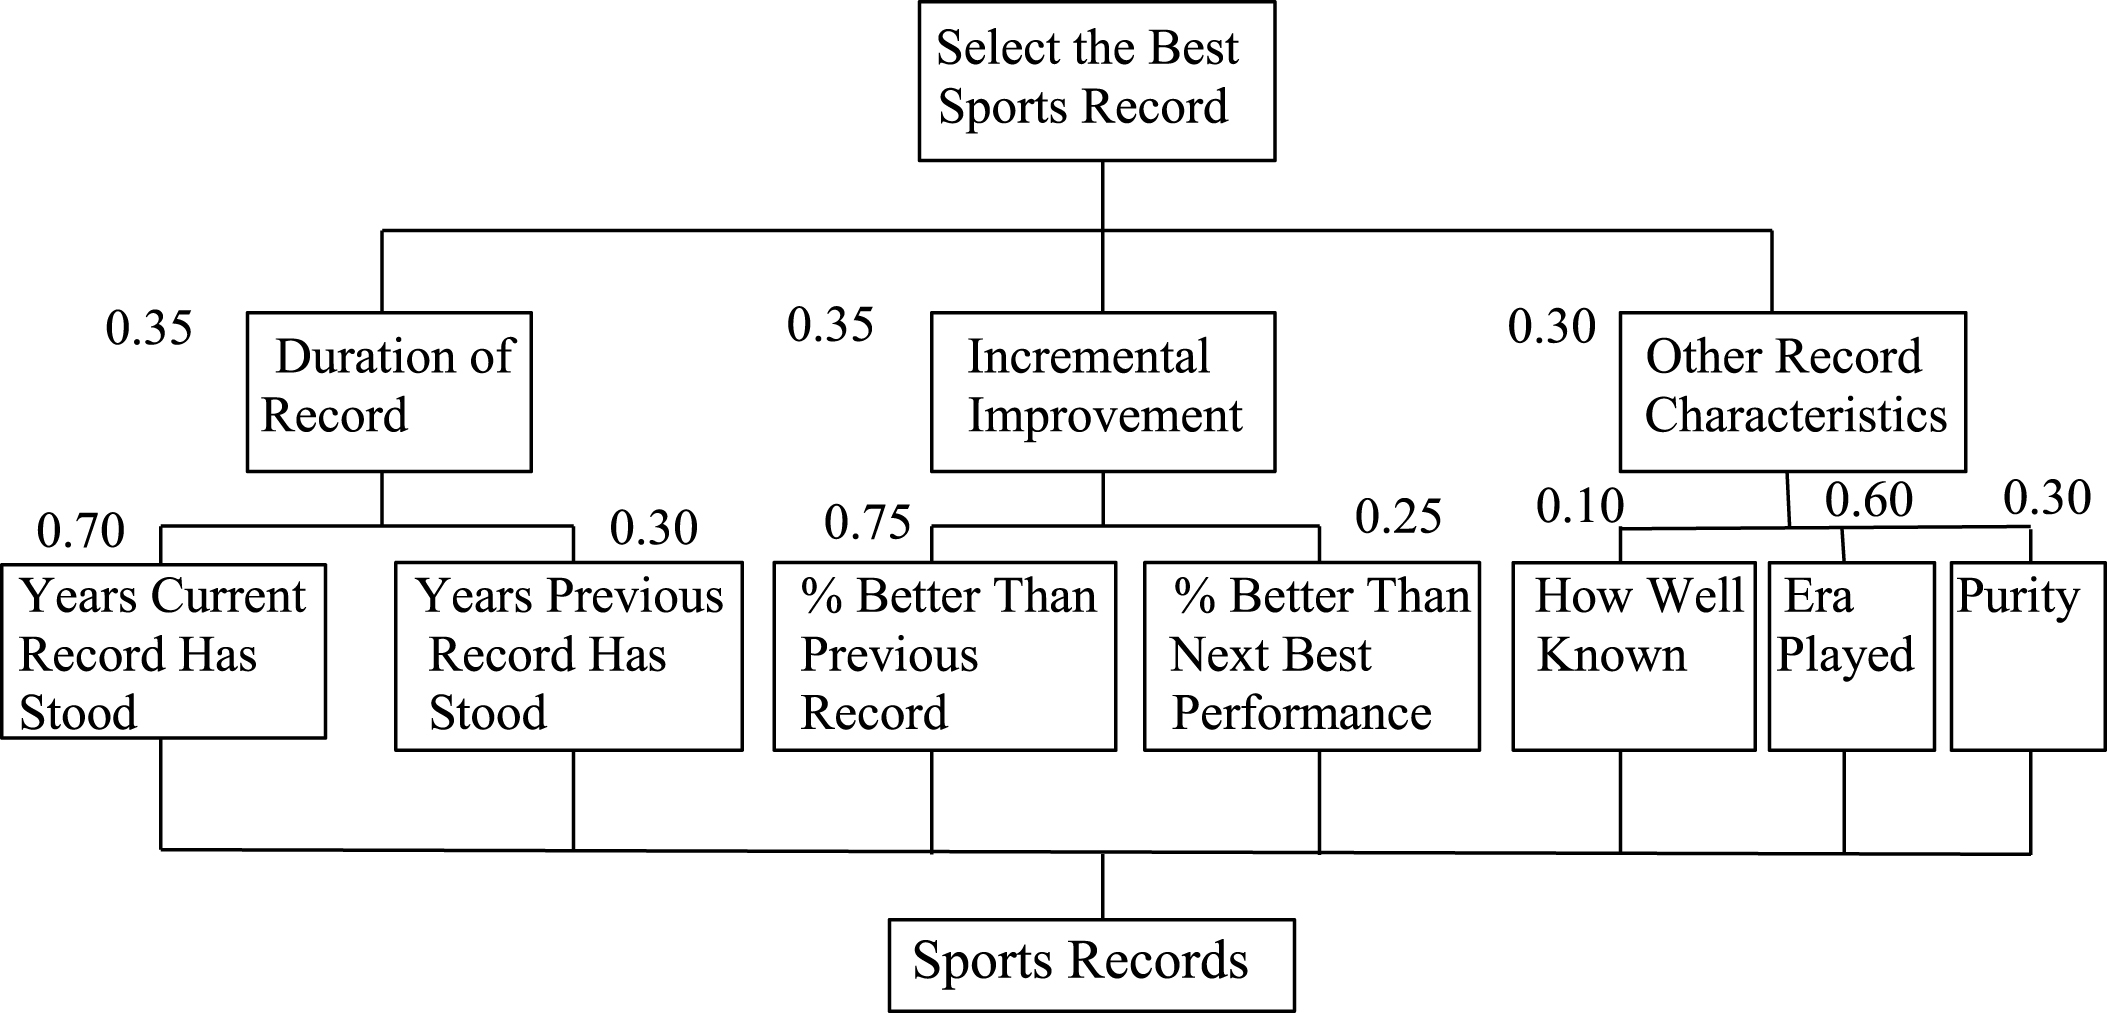 AHP hierarchy for evaluating sports records.